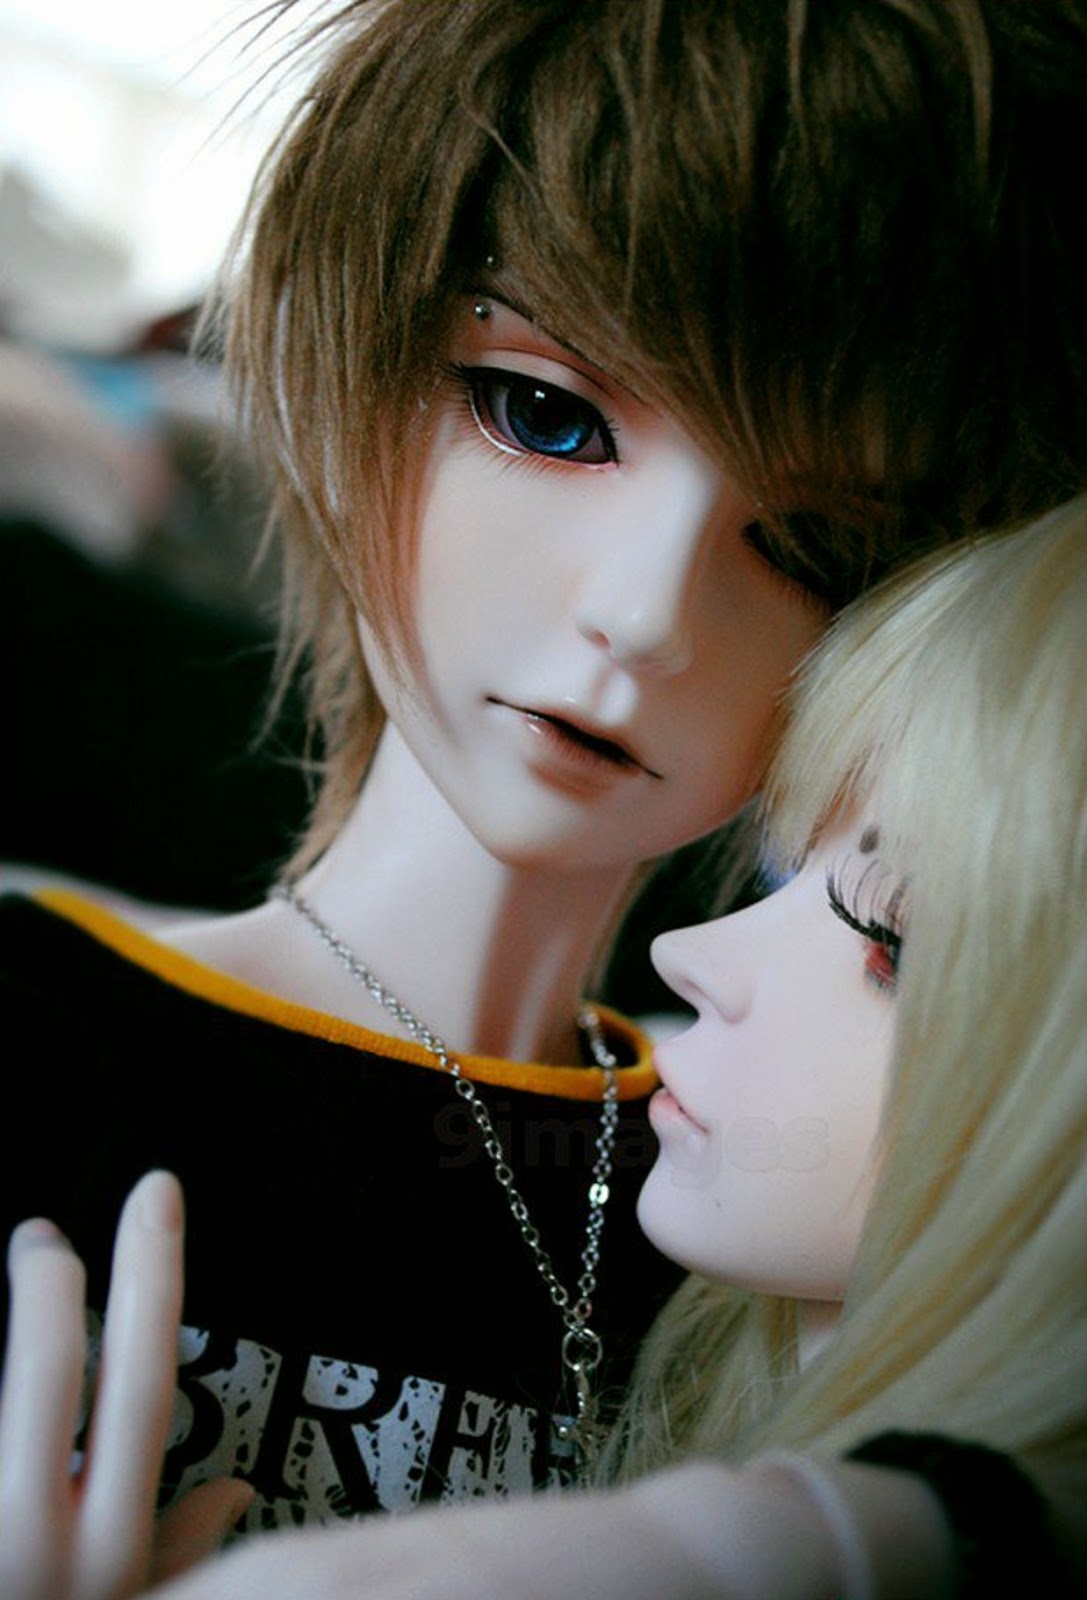 doll couple wallpaper,hair,doll,hairstyle,blond,wig